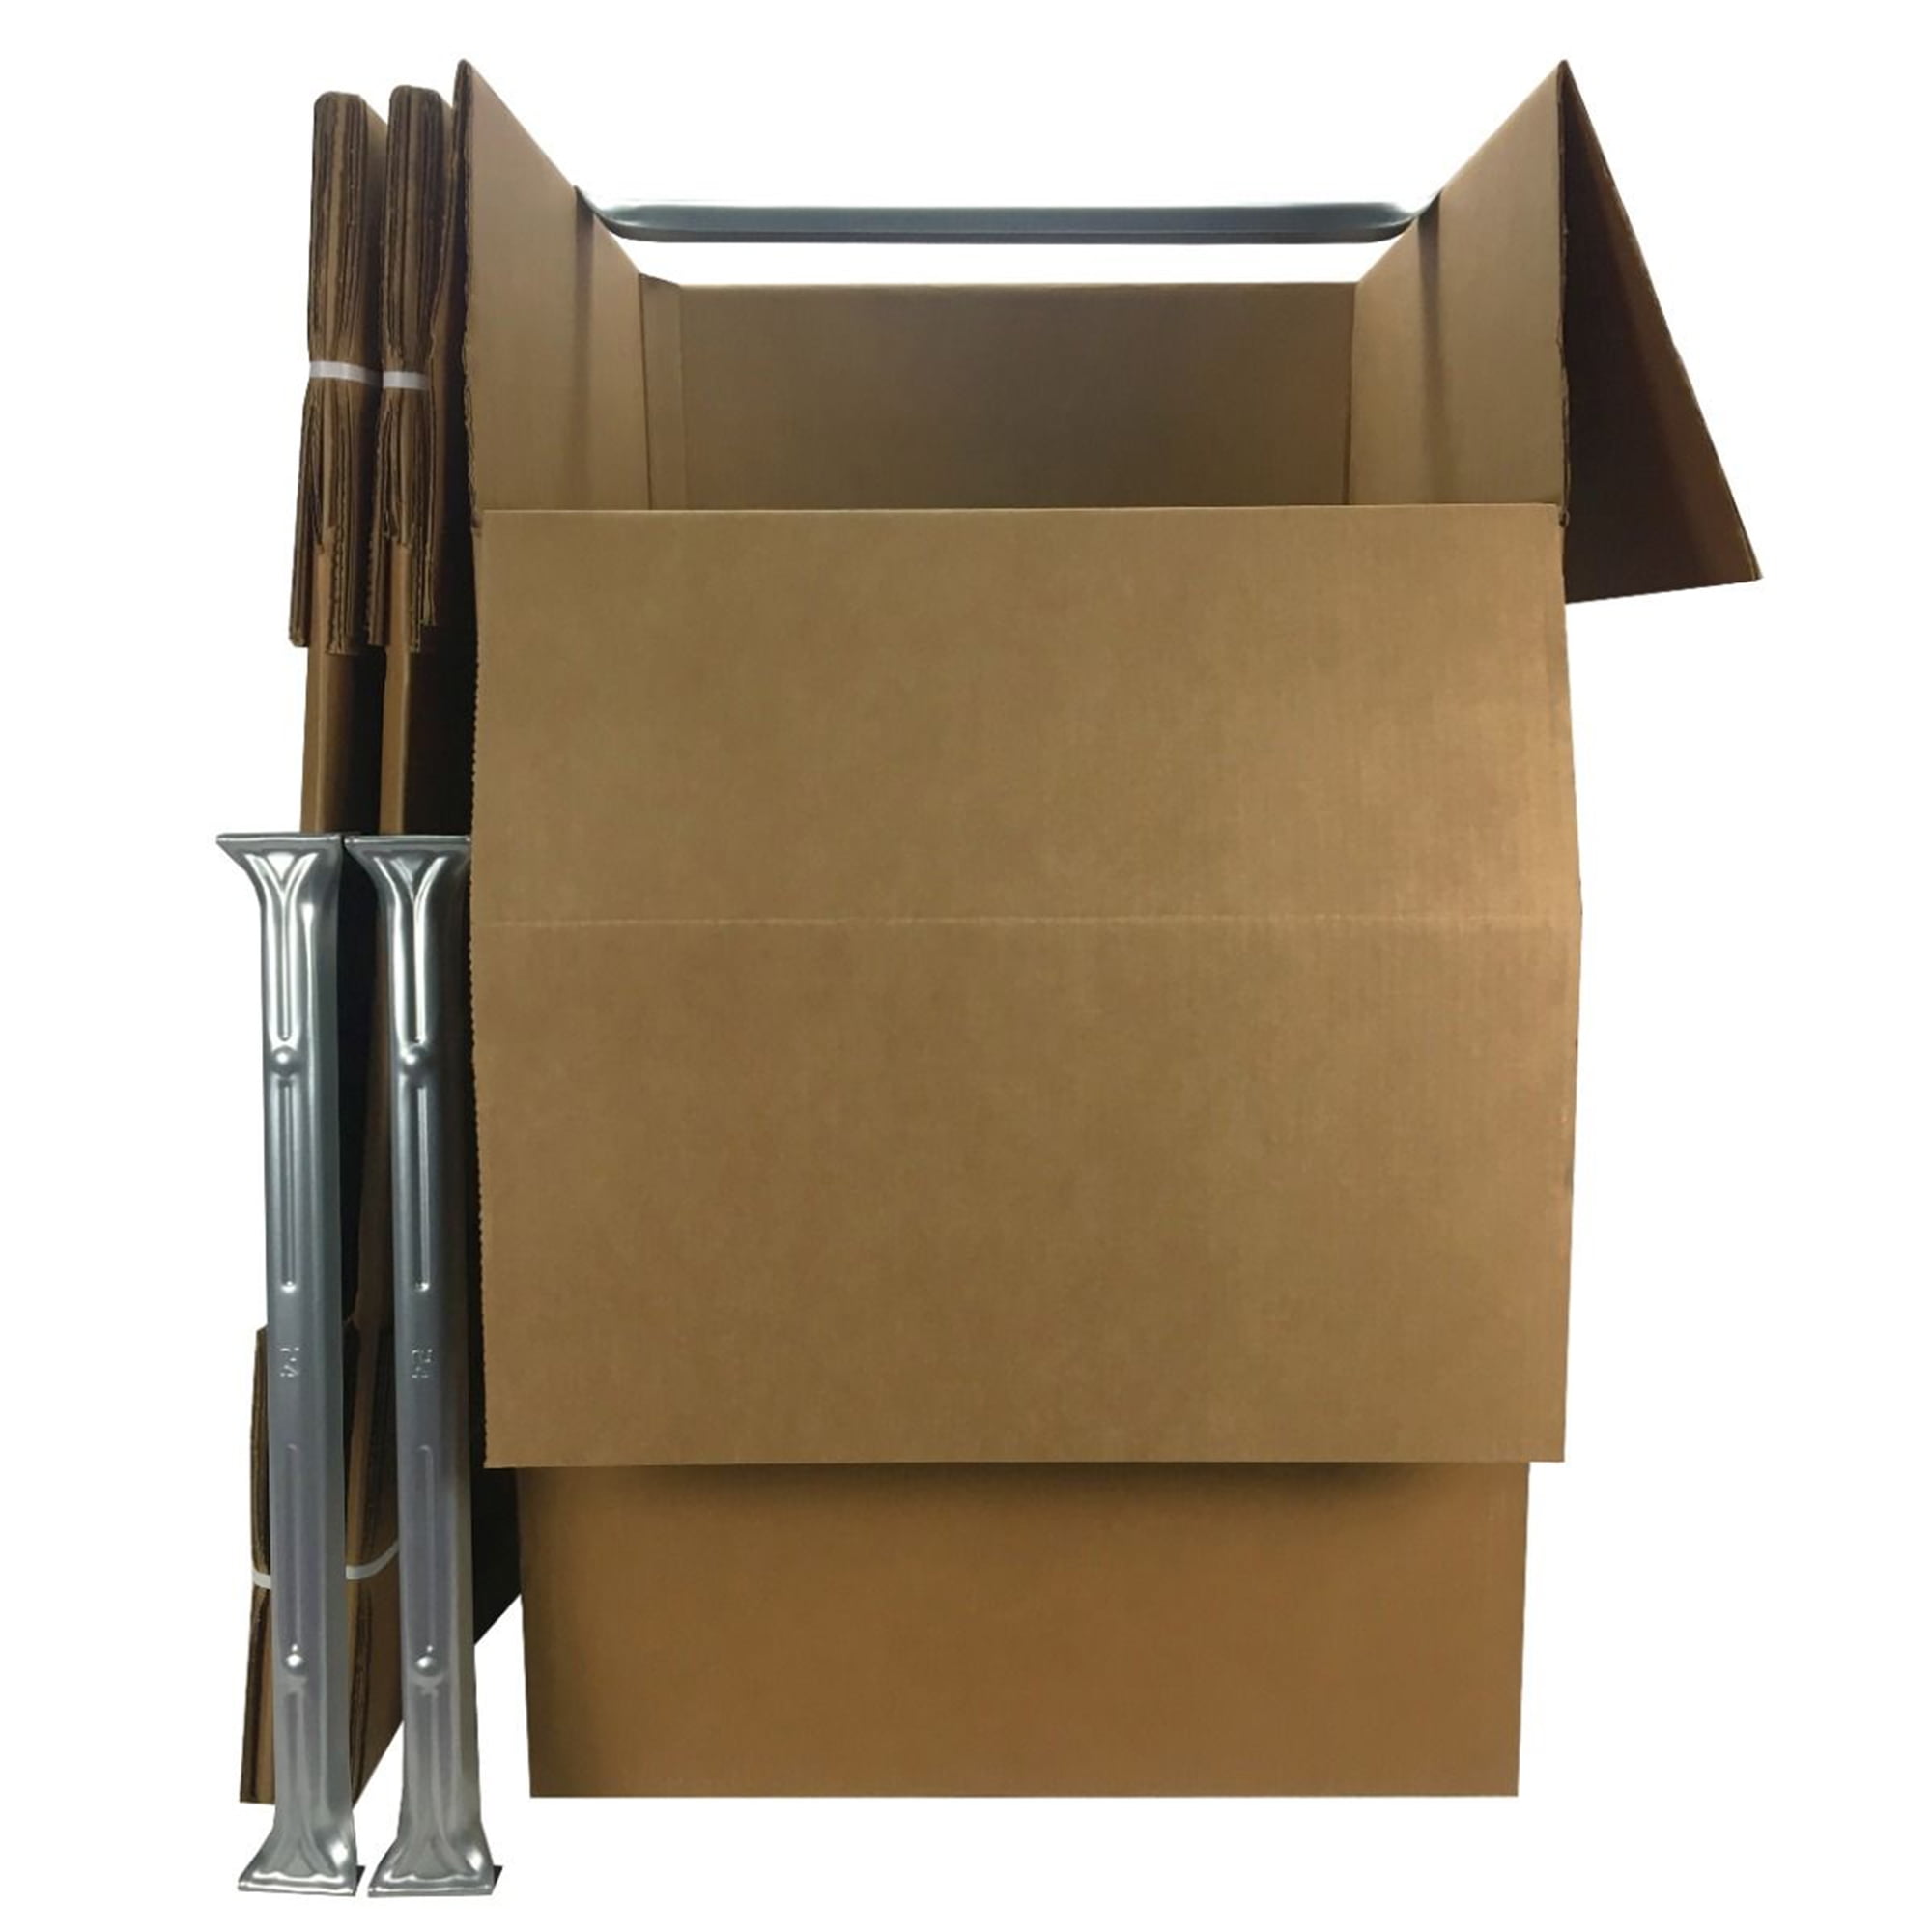 20 Length 8 Width 20 L x 8 W x 50 H BOX USA BHD20850FOLMS Heavy-Duty Side Loading Moving Boxes Pack of 5 Kraft 50 Height 